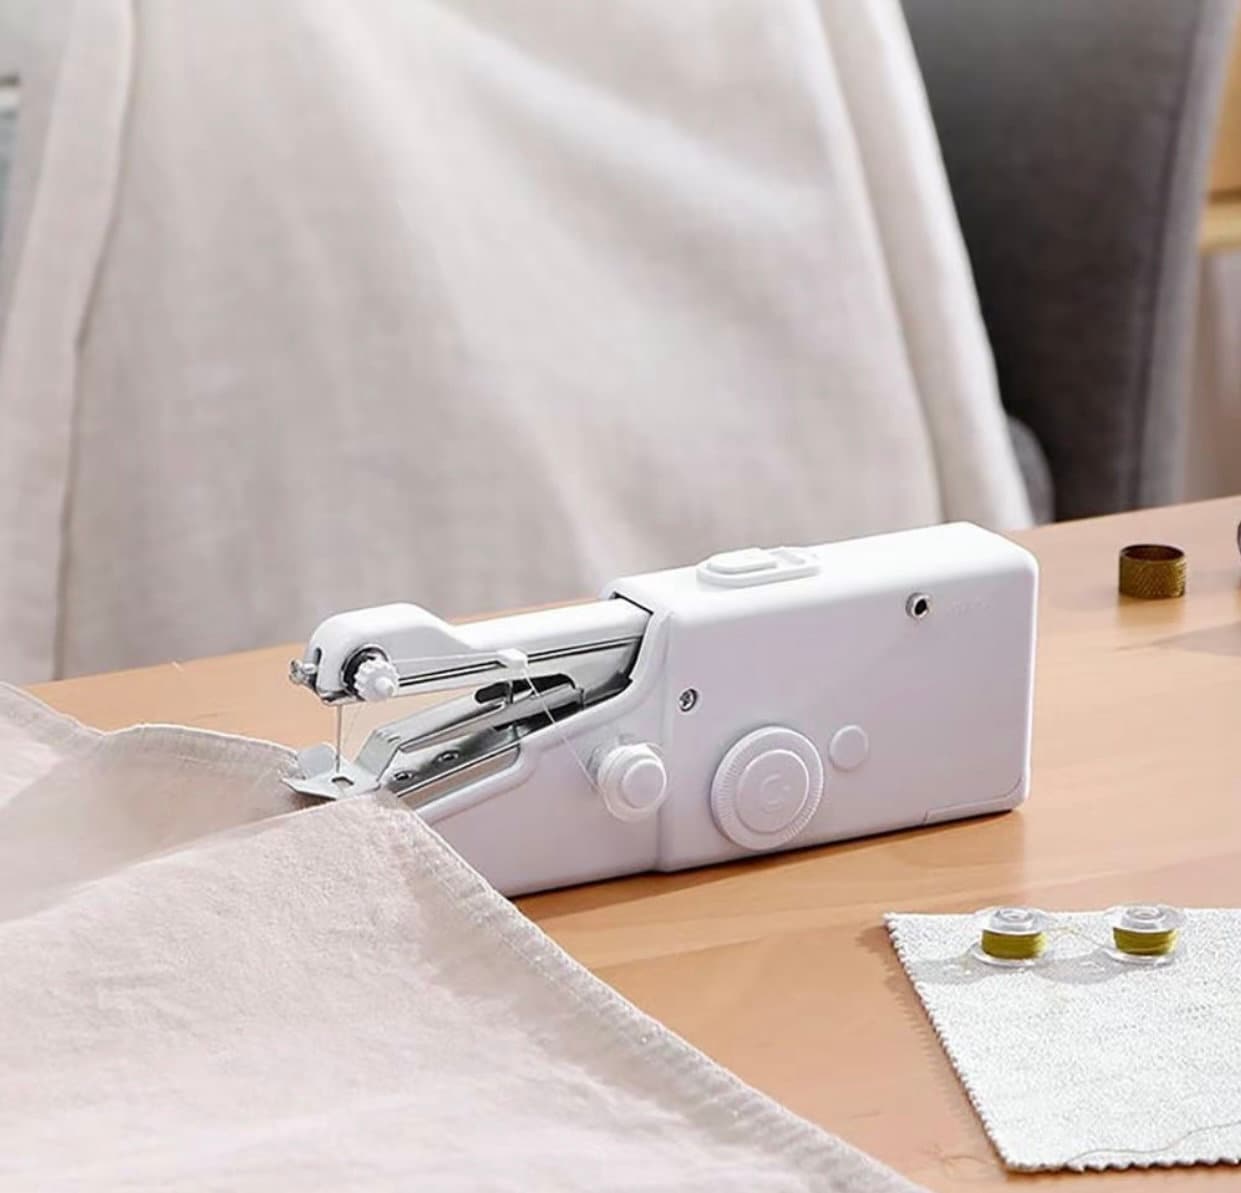 Magic Stitch Cordless, Portable, Handheld Sewing Machine, Cordless Electric Stitch Tool, Household Sewing Device for Fabric, Clothing, Home, Travel